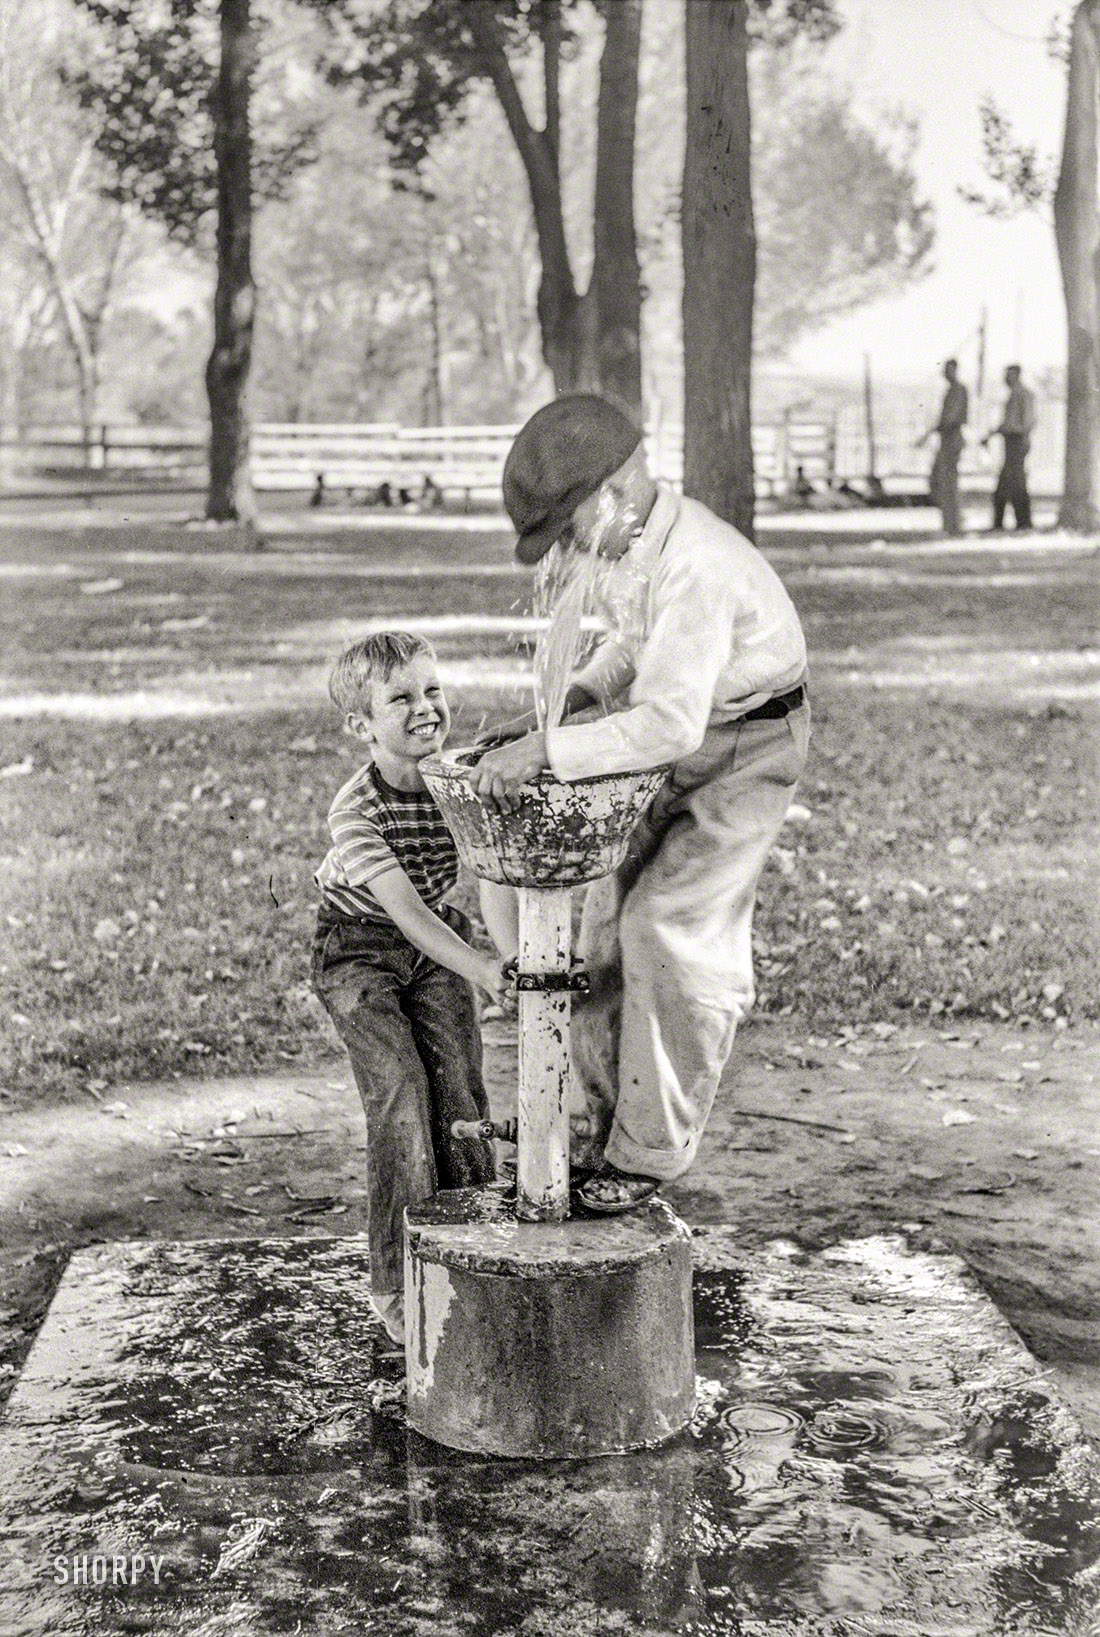 July 1941. "Fun at the water fountain. Fourth of July picnic in Vale, Oregon." Photo by Russell Lee for the Farm Security Administration. View full size.